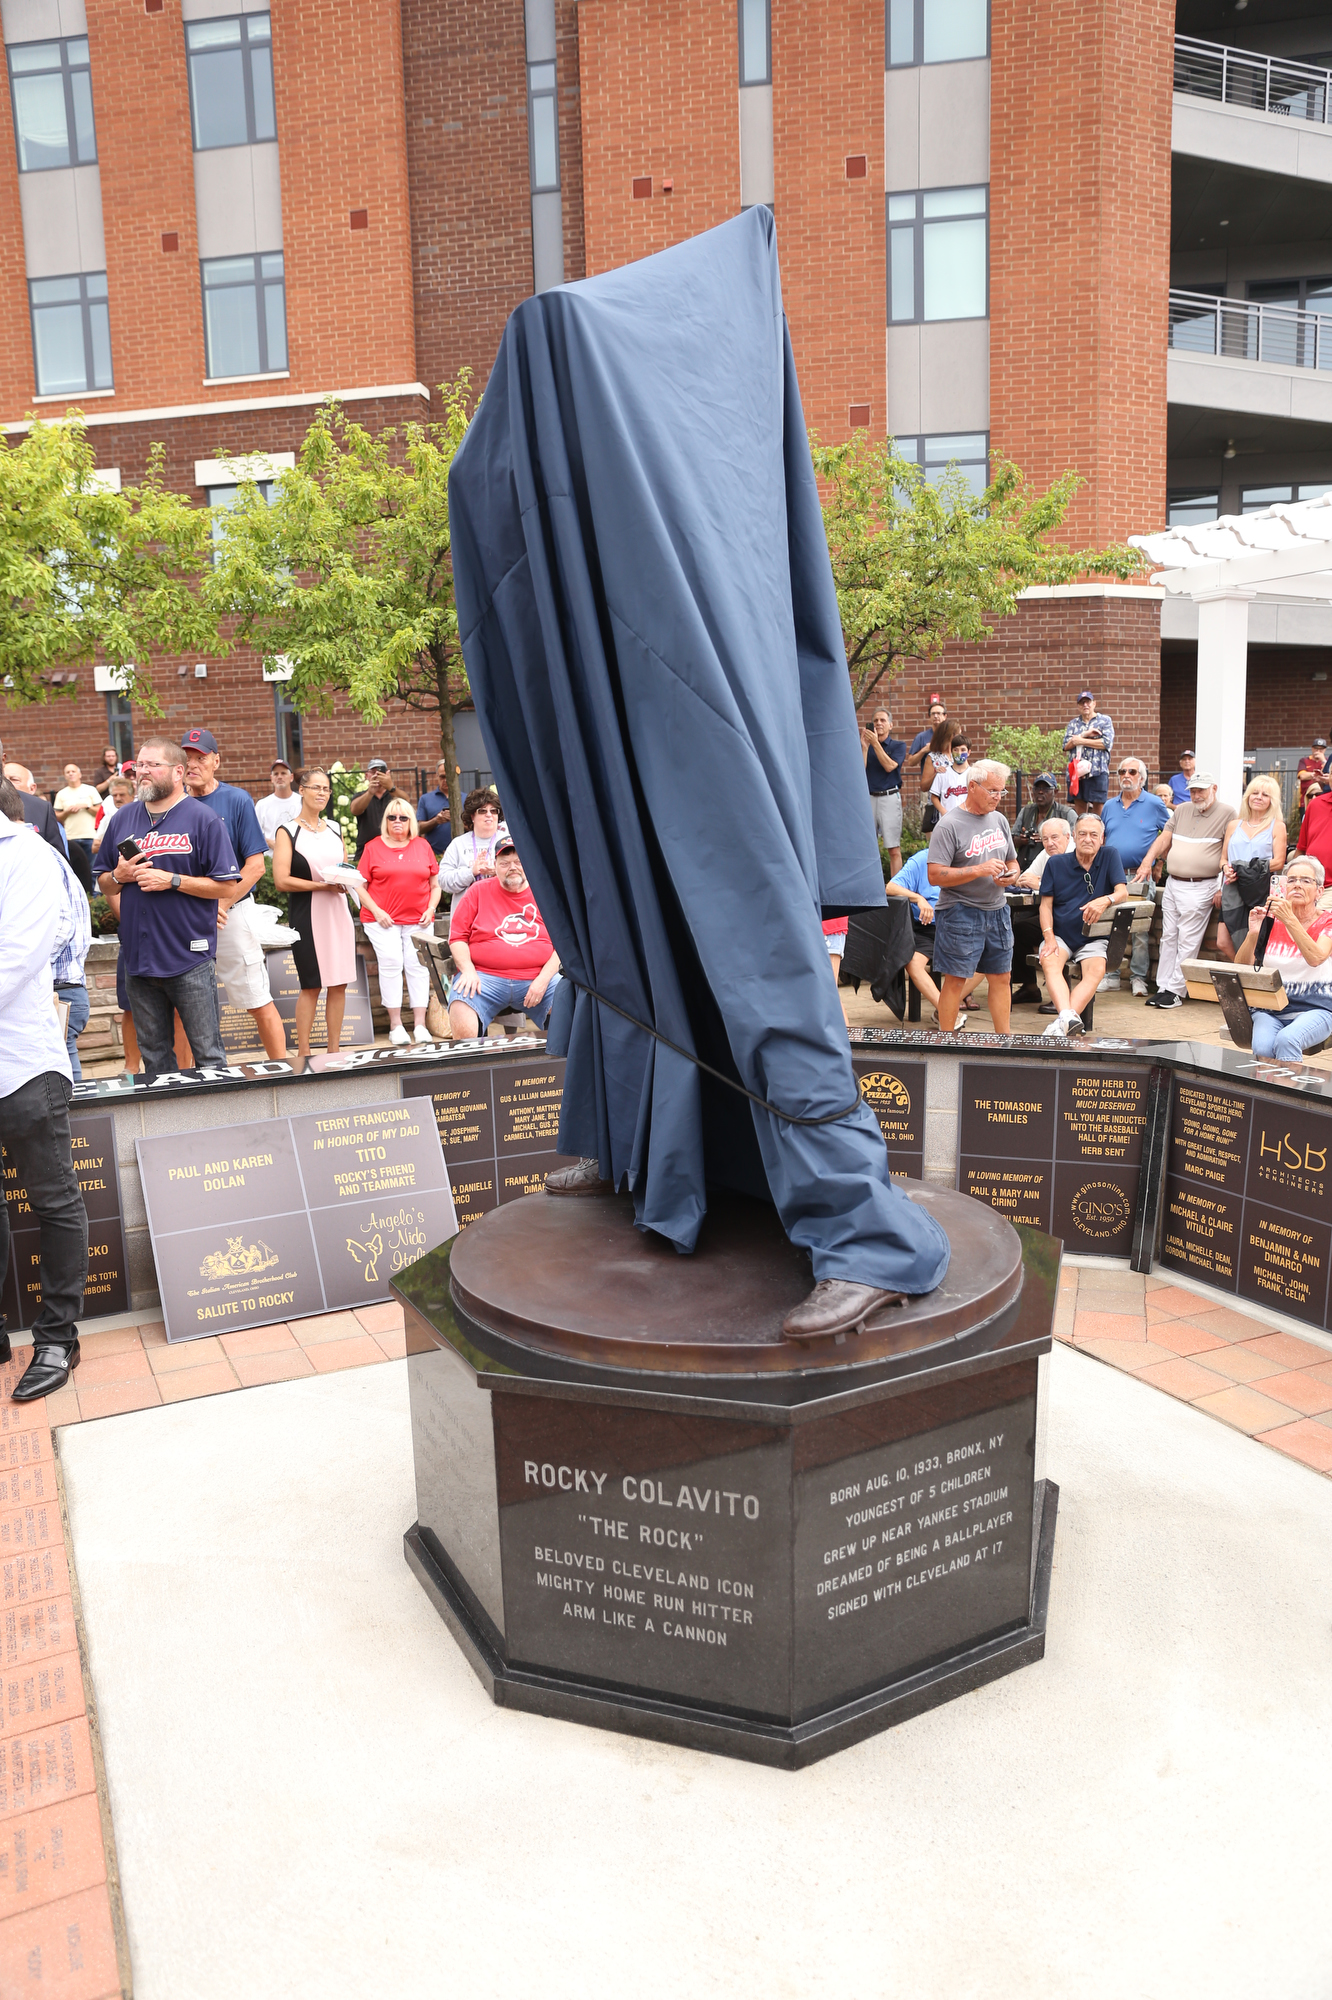 Cleveland baseball legend Rocky Colavito honored with statue in Little Italy